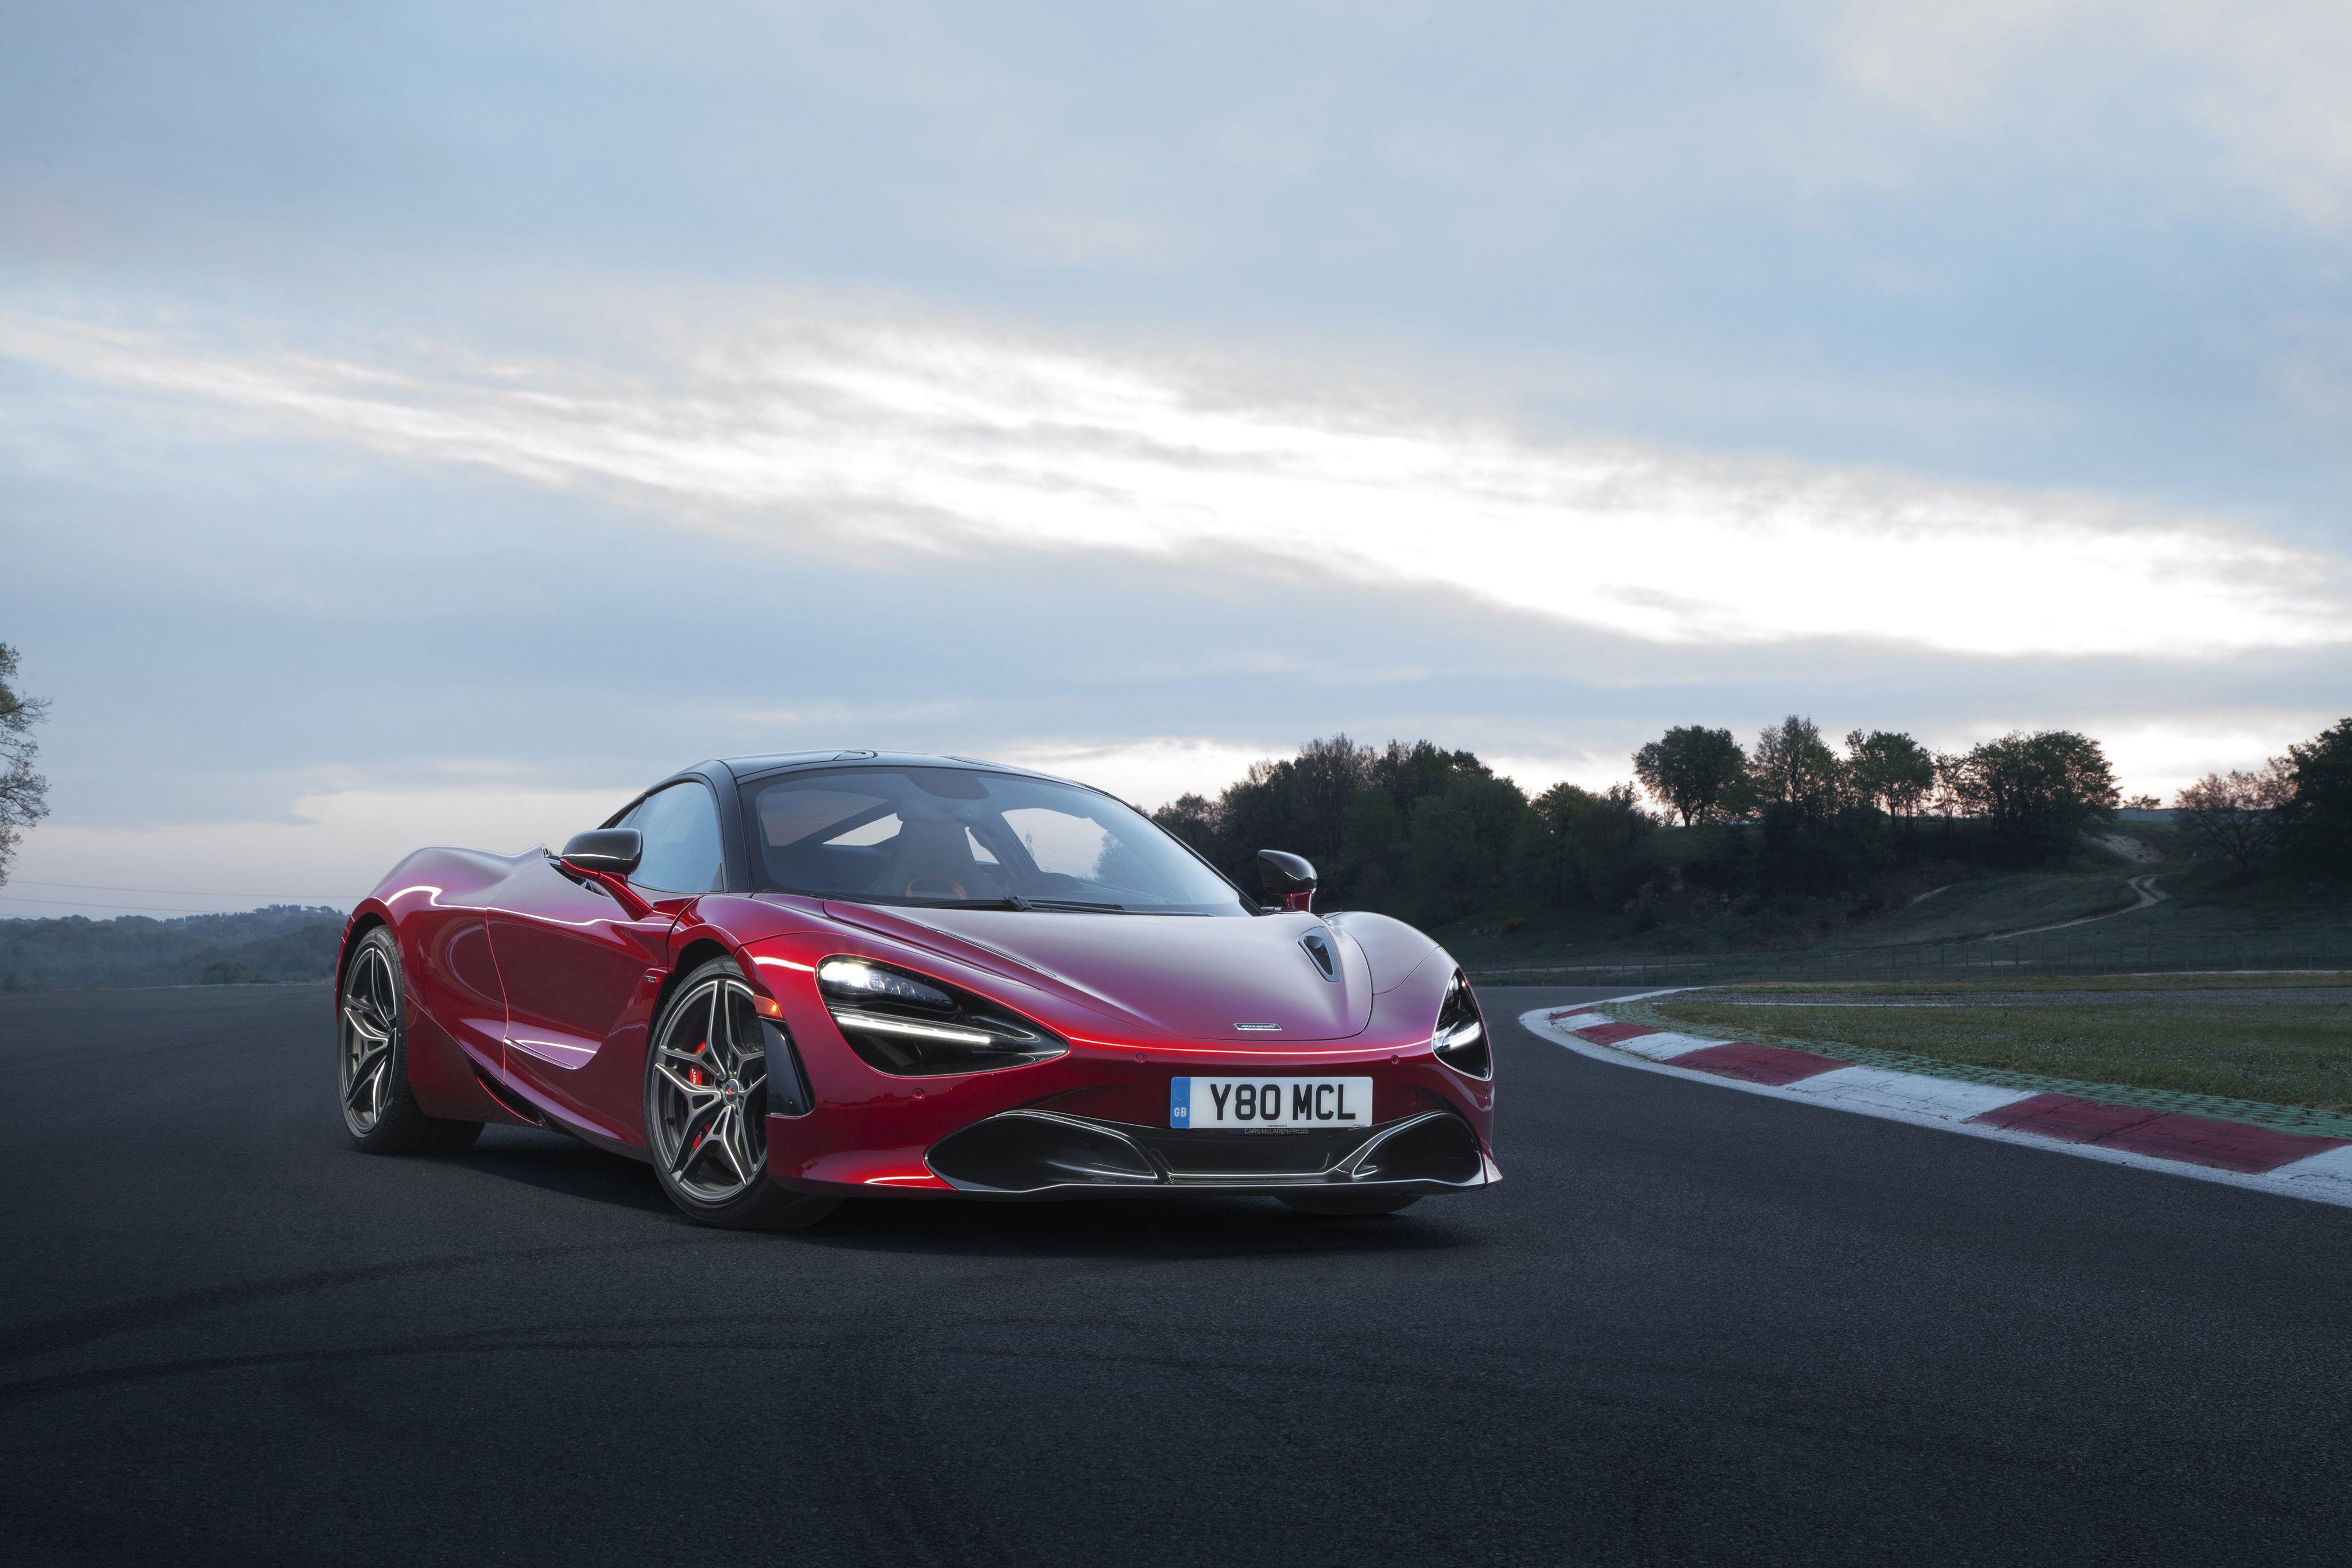 Red sports car McLaren 720S, 2017 wallpaper and image